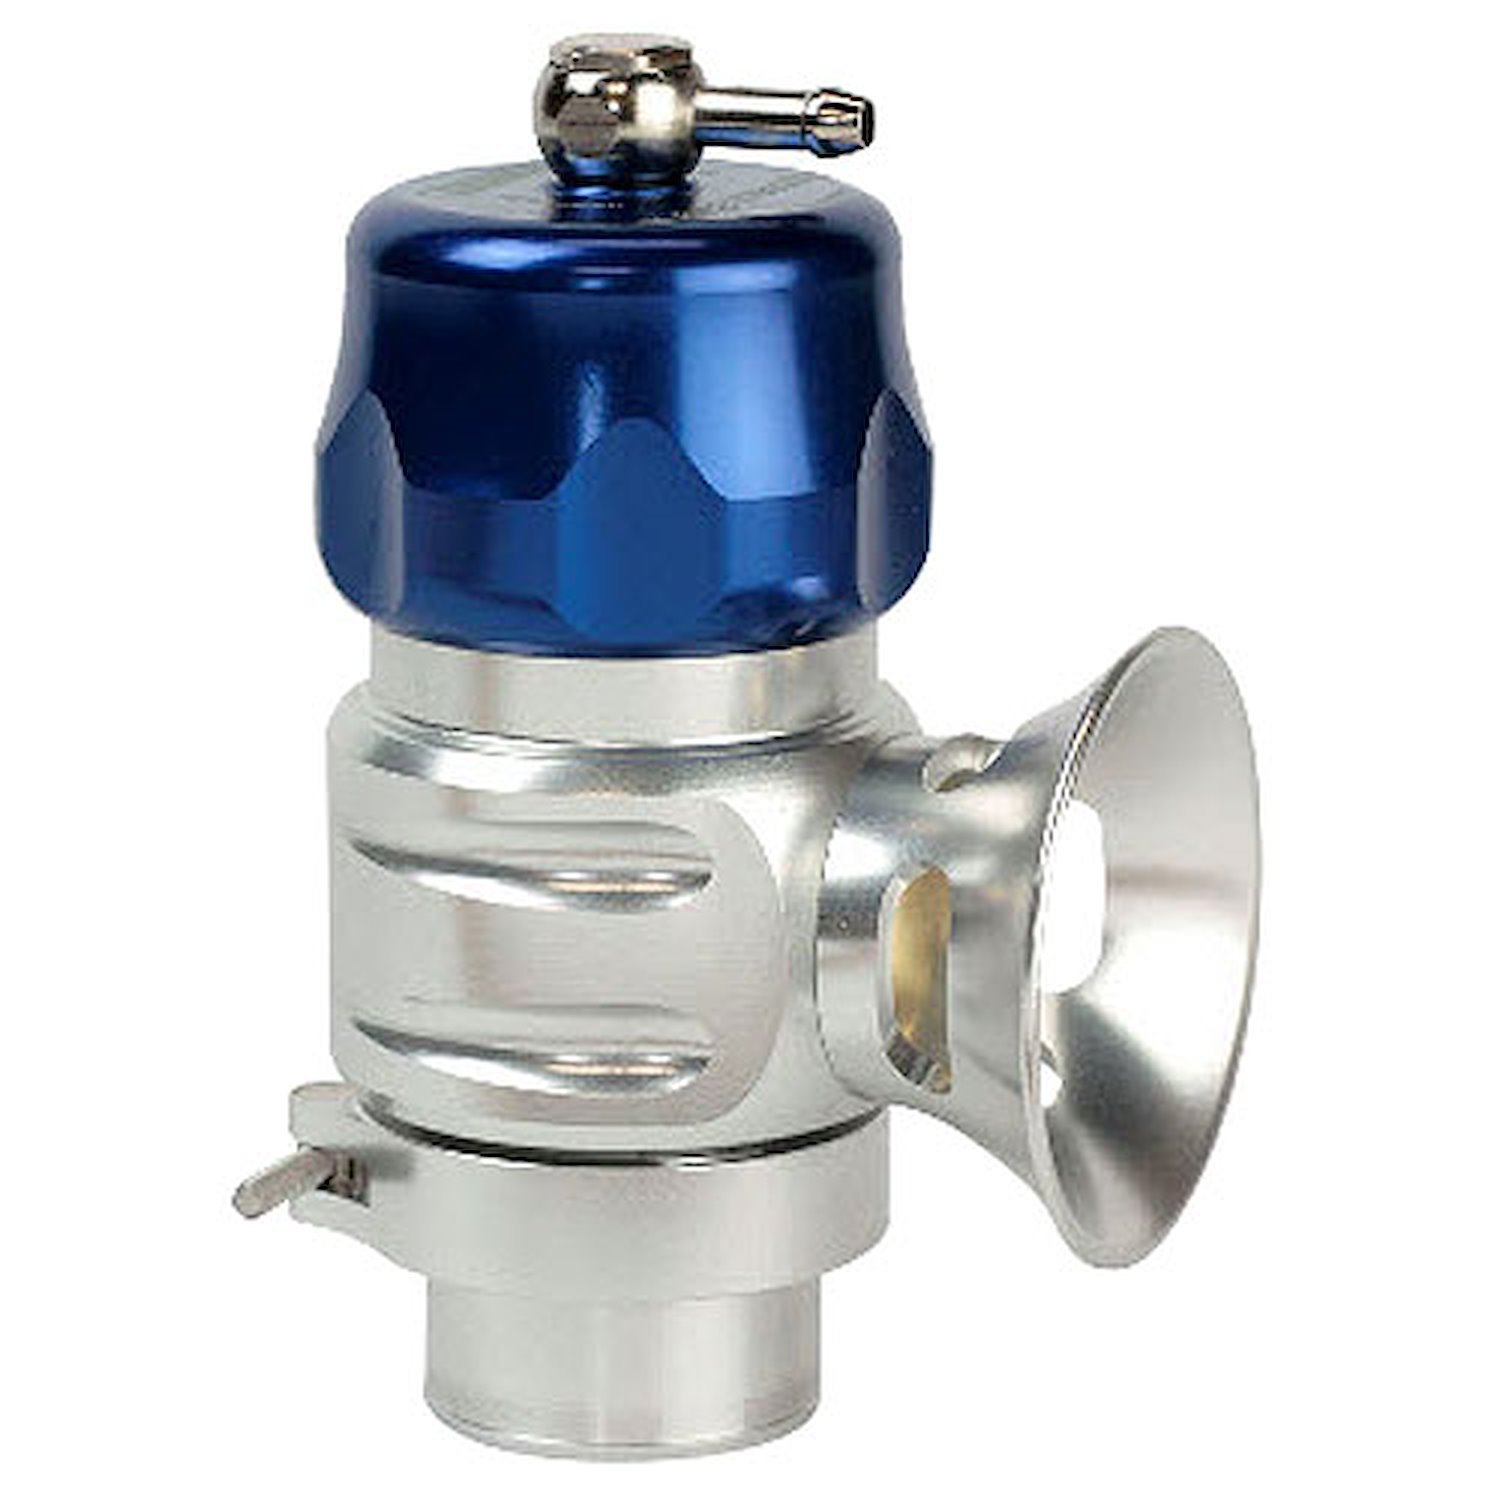 Supersonic Type 5 Blow-Off Valve Universal Application